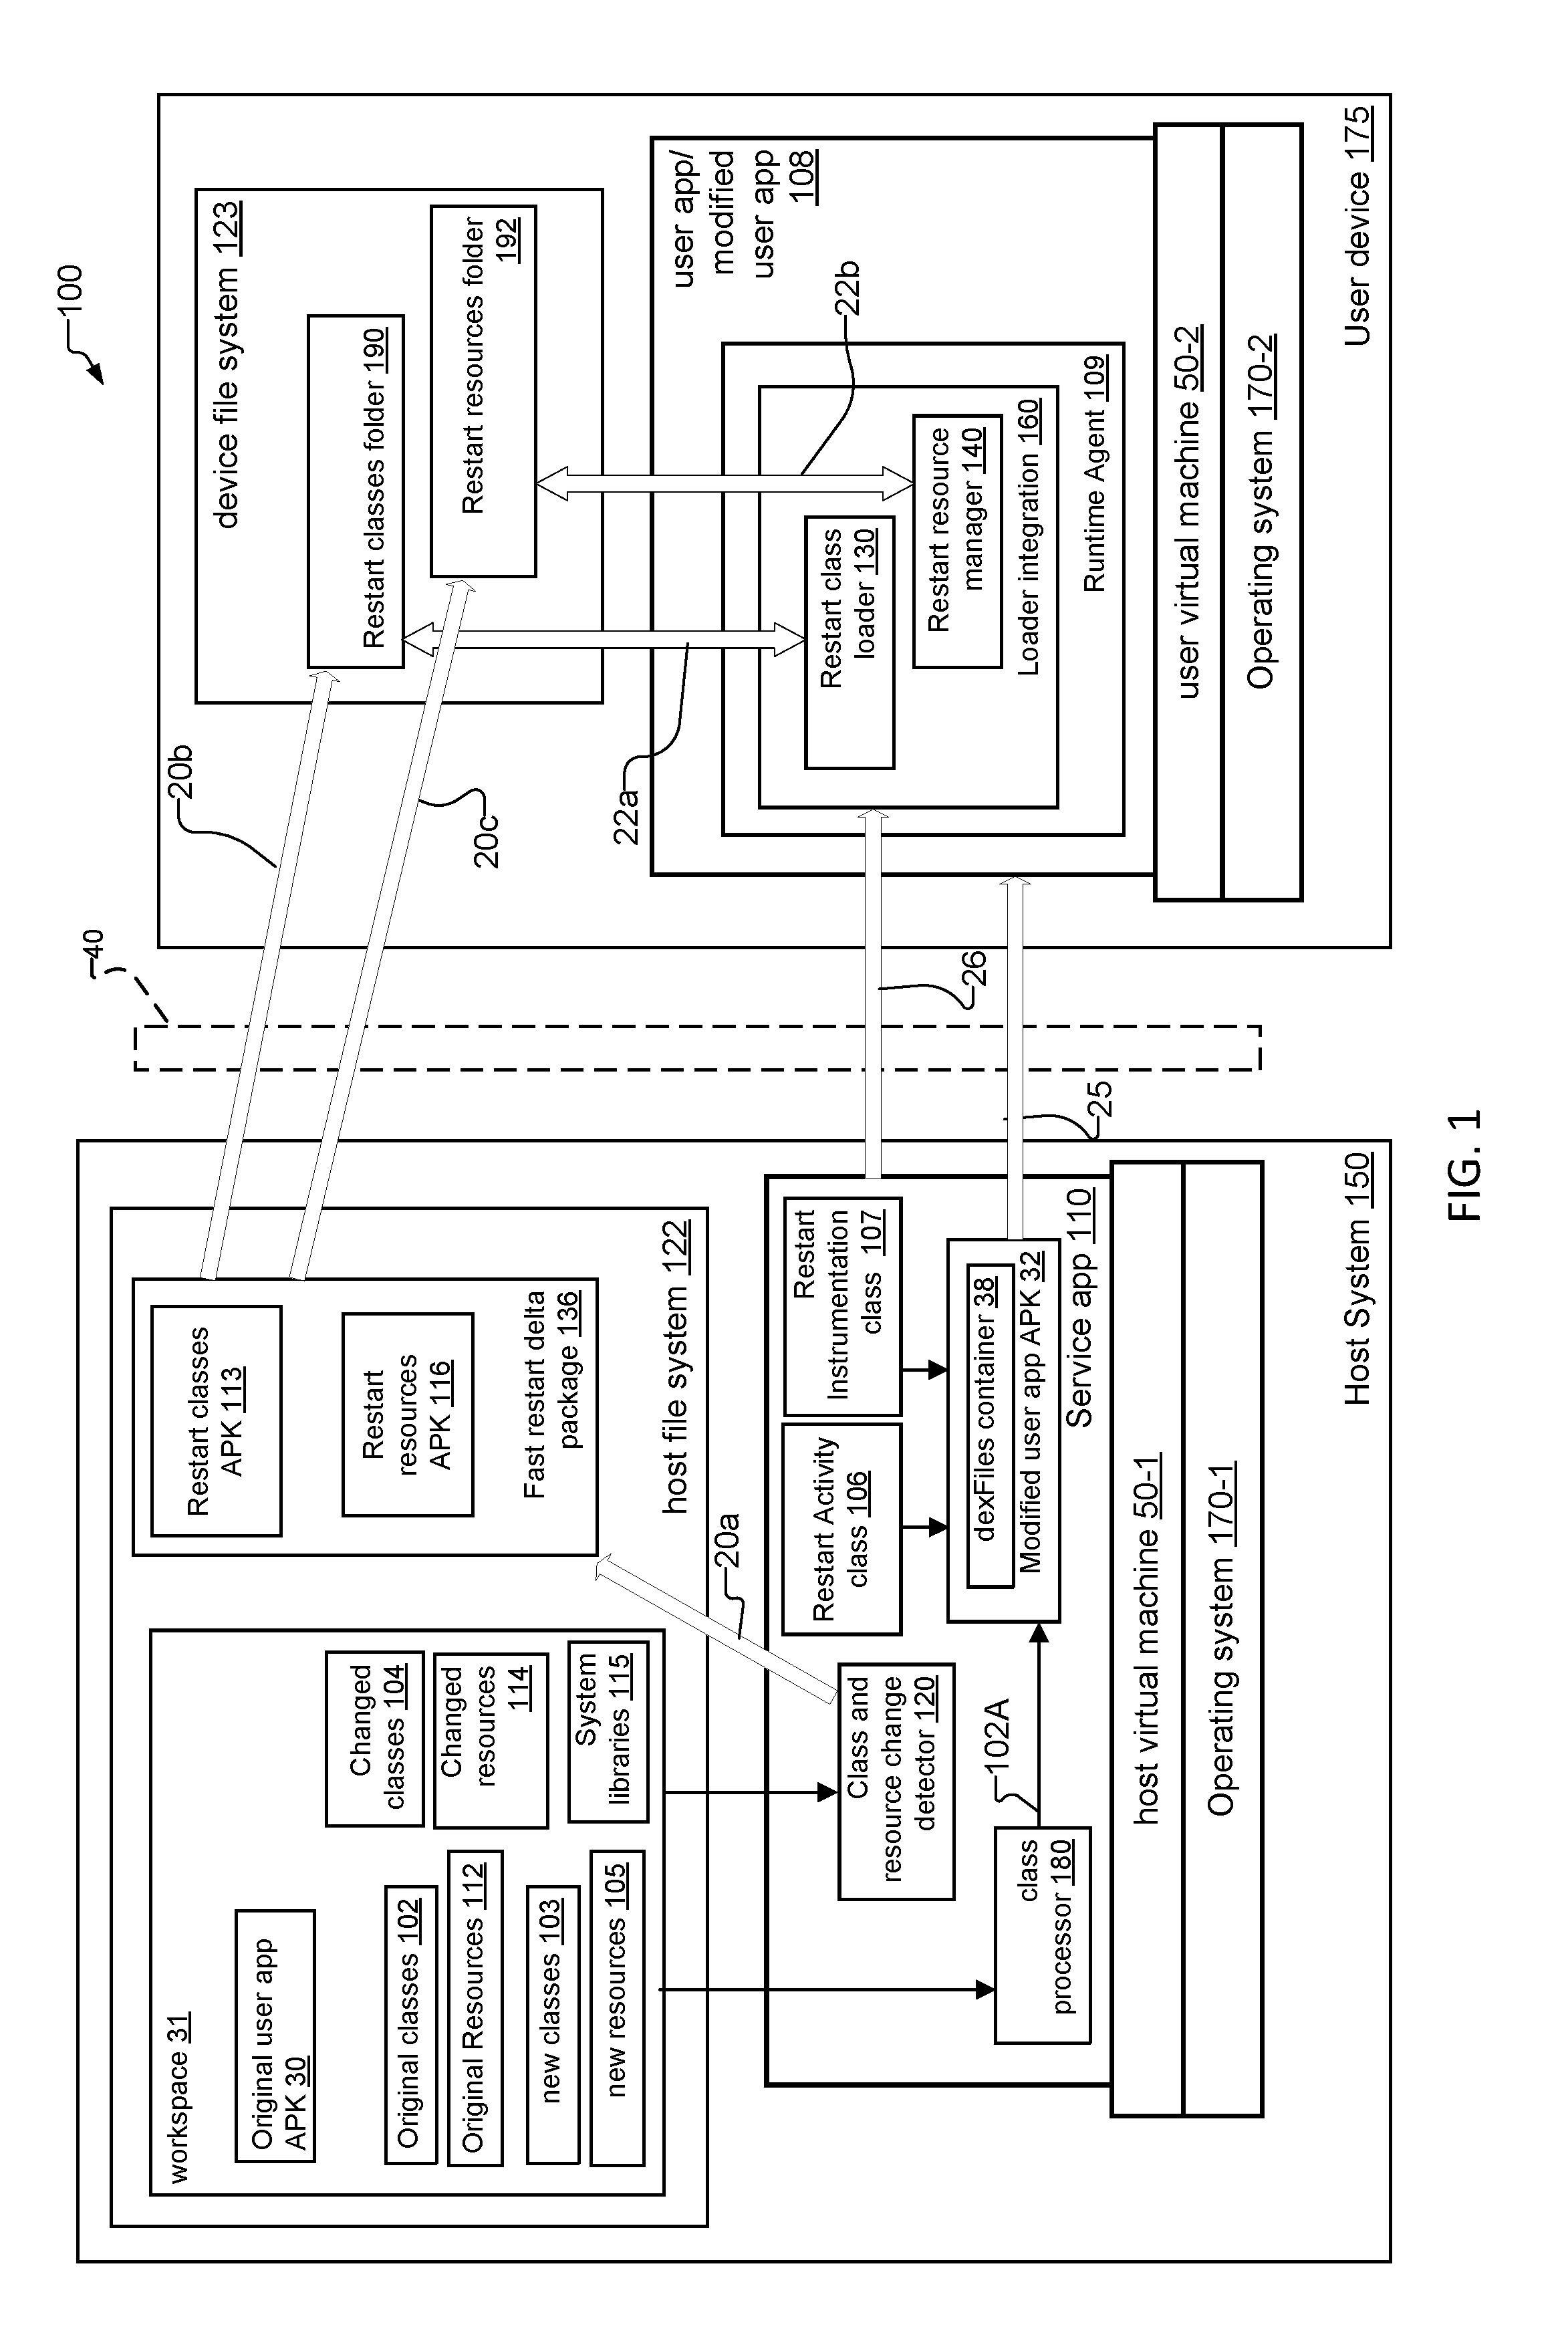 System and Method for Fast Restarting of User Apps